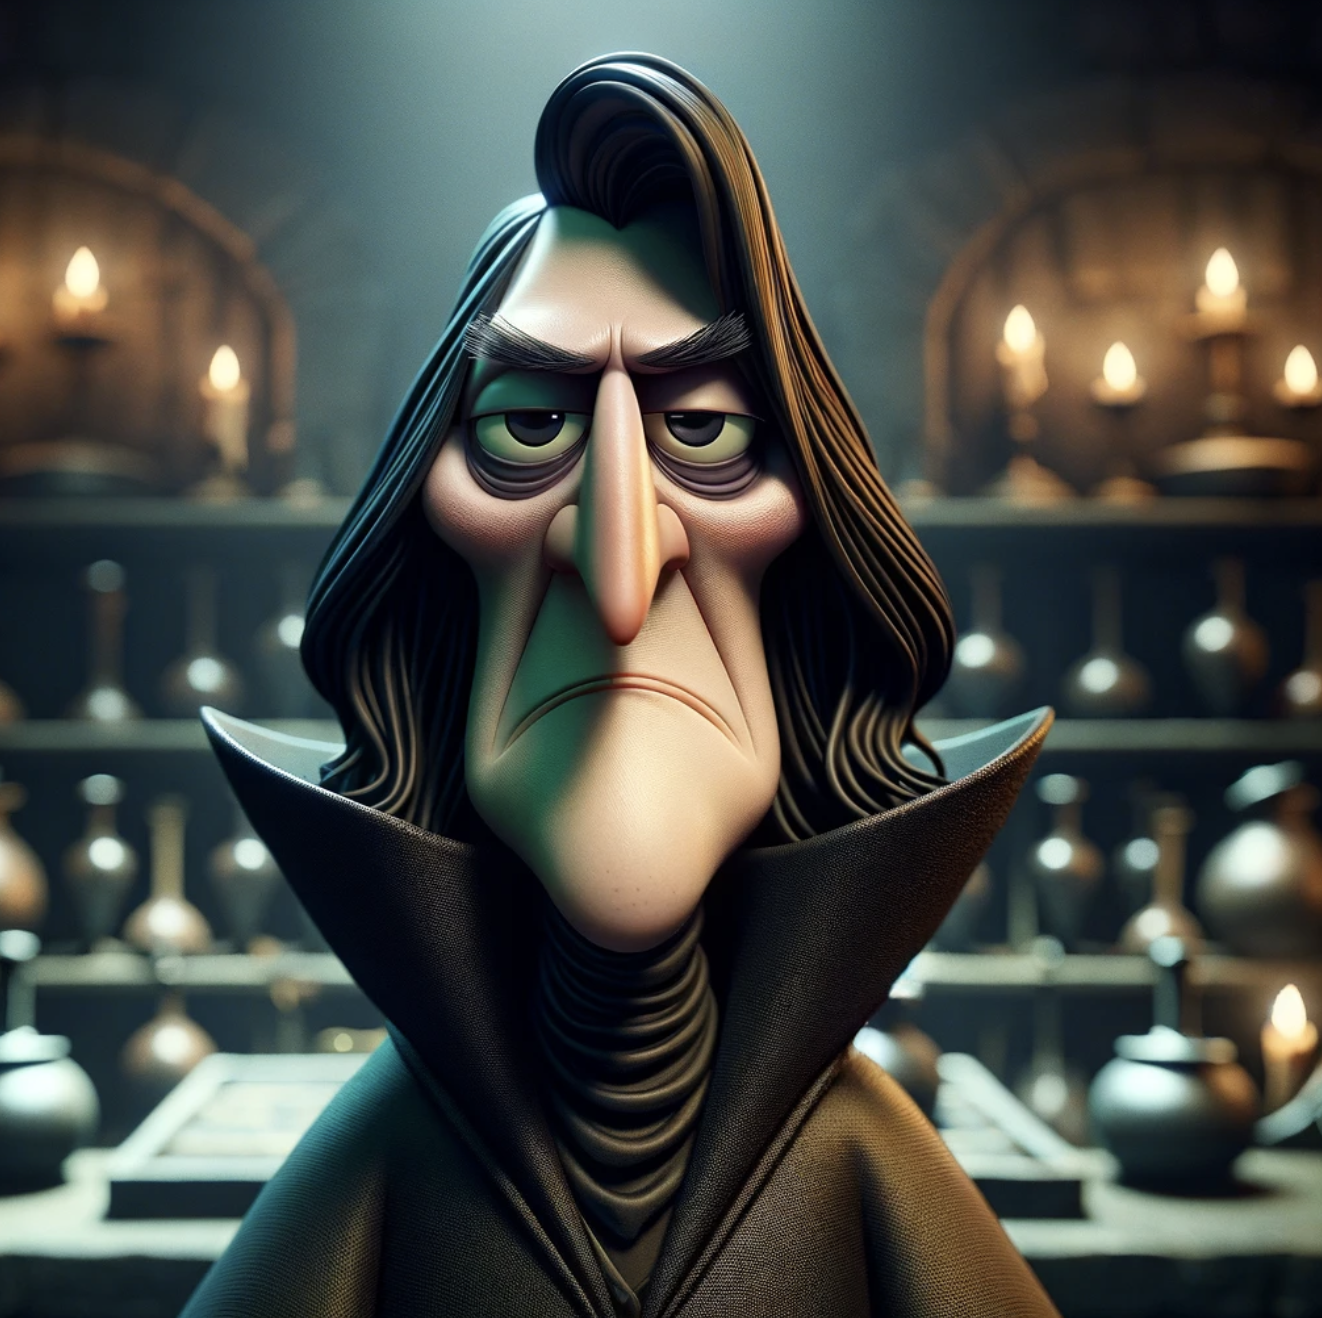 Animated character Severus Snape from &quot;Harry Potter&quot; series depicted in a stylized 3D illustration, standing in the Potions classroom